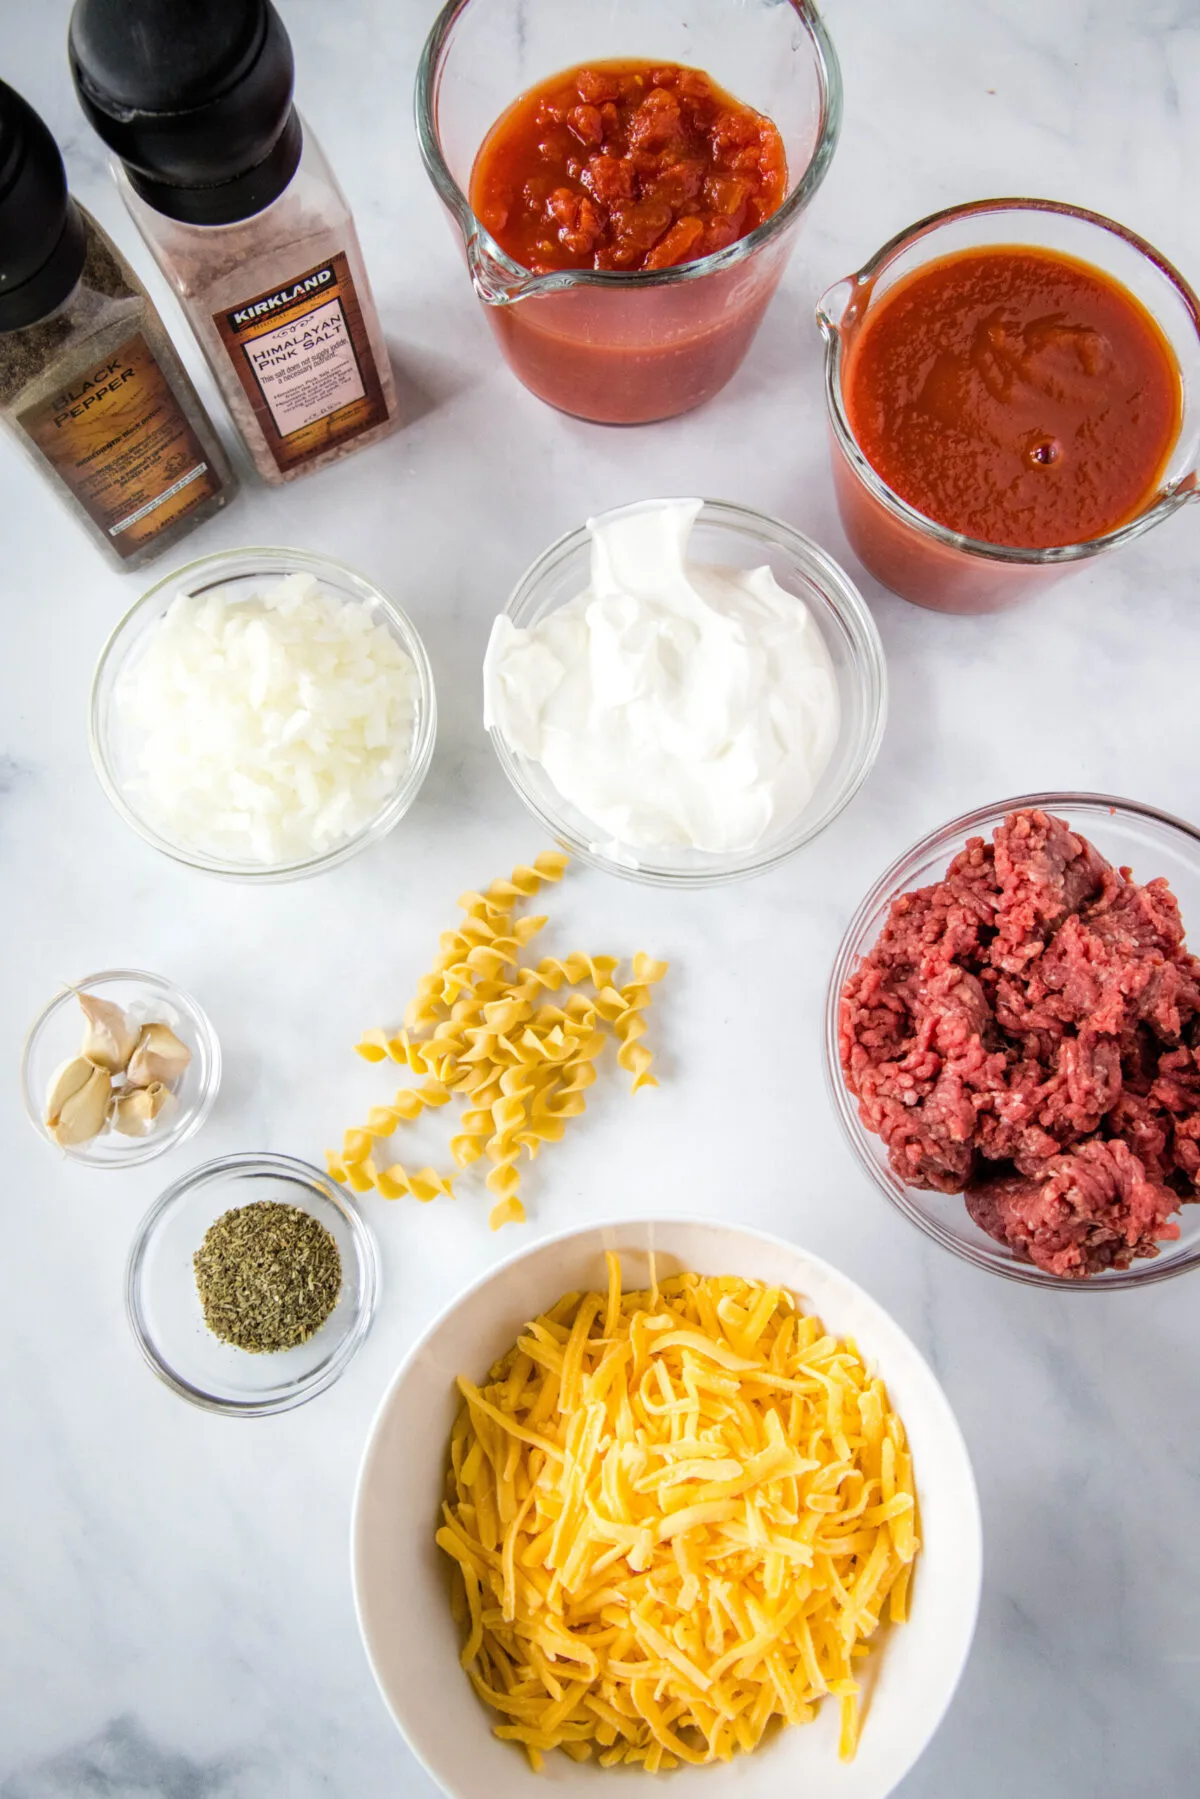 Overhead view of the ingredients needed for beef noodle casserole: a bowl of ground beef, a bowl of shredded cheese, a bowl of sour cream, a bowl of onions, a bowl of pepper, a bowl of garlic, a bowl of Italian seasoning, a jar of tomatoes, a jar of tomato sauce, some scattered egg noodles, and salt and pepper grinders